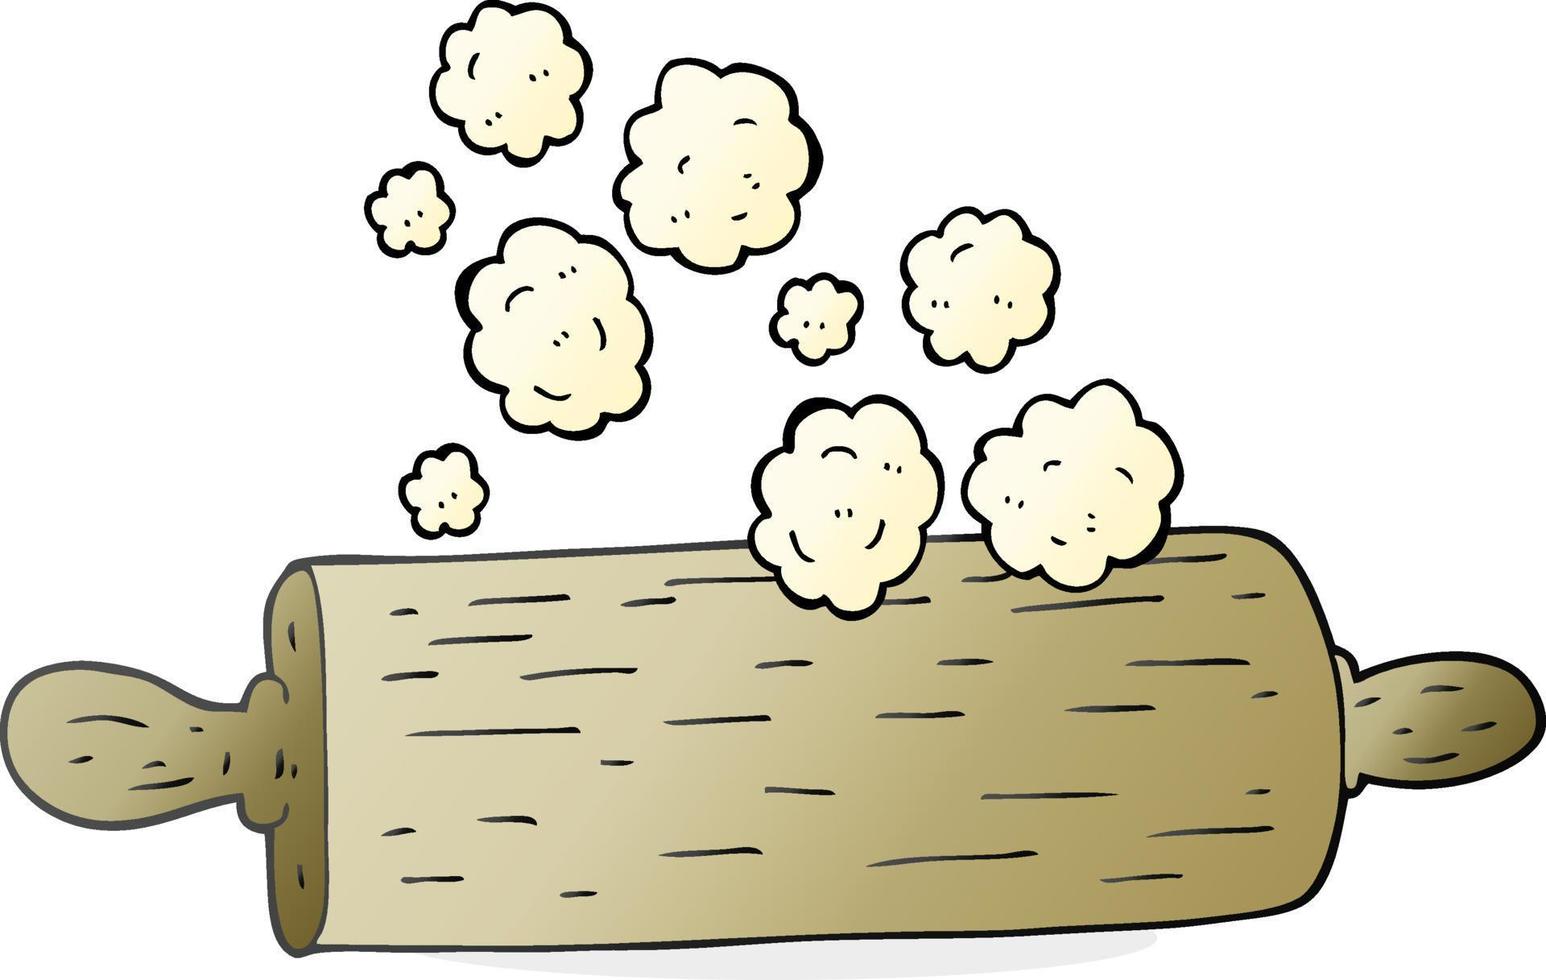 freehand drawn cartoon rolling pin vector